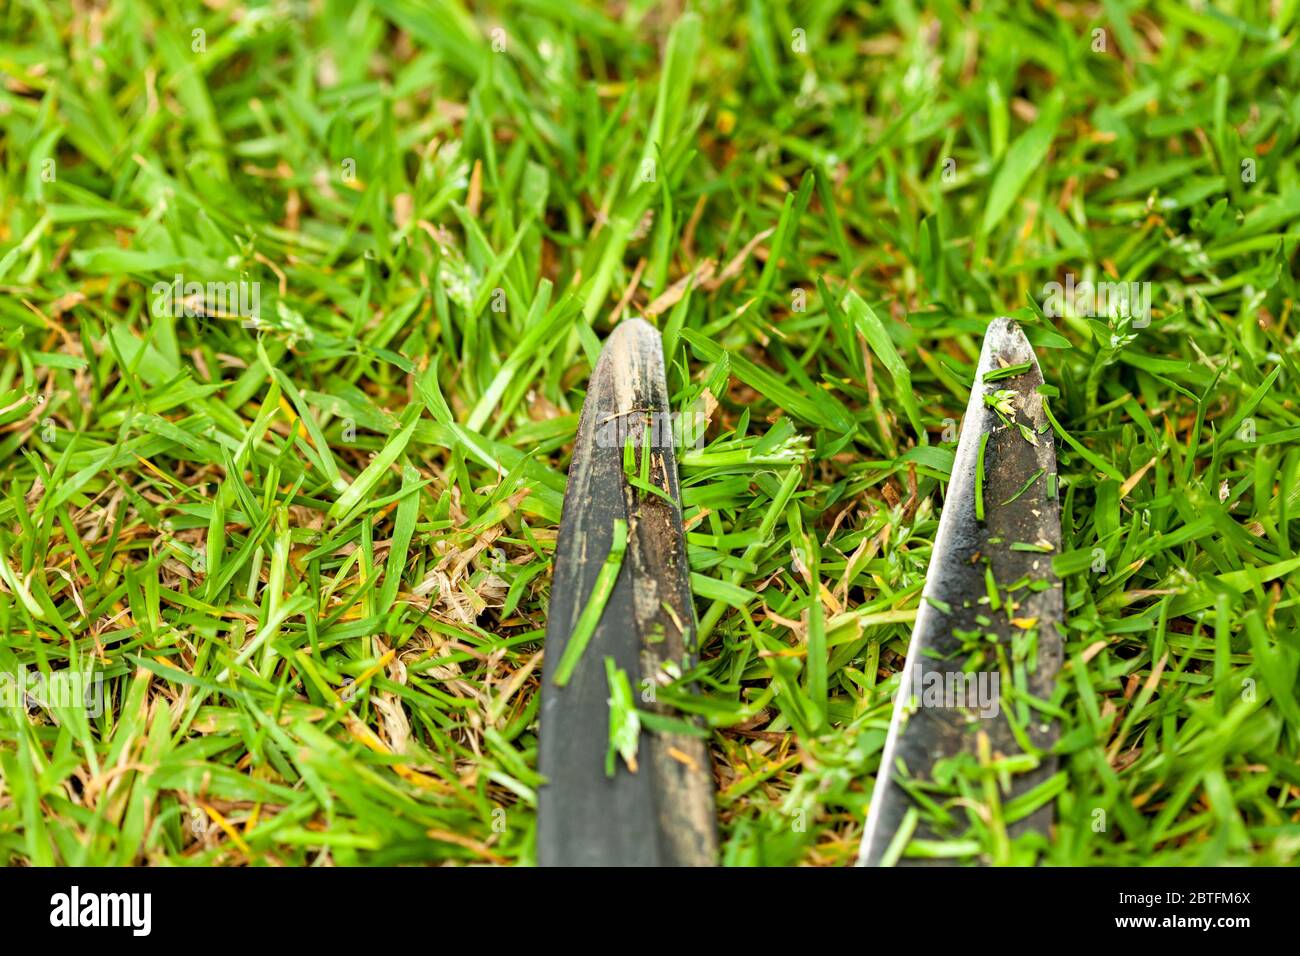 Garden clippers or shears on grass Stock Photo